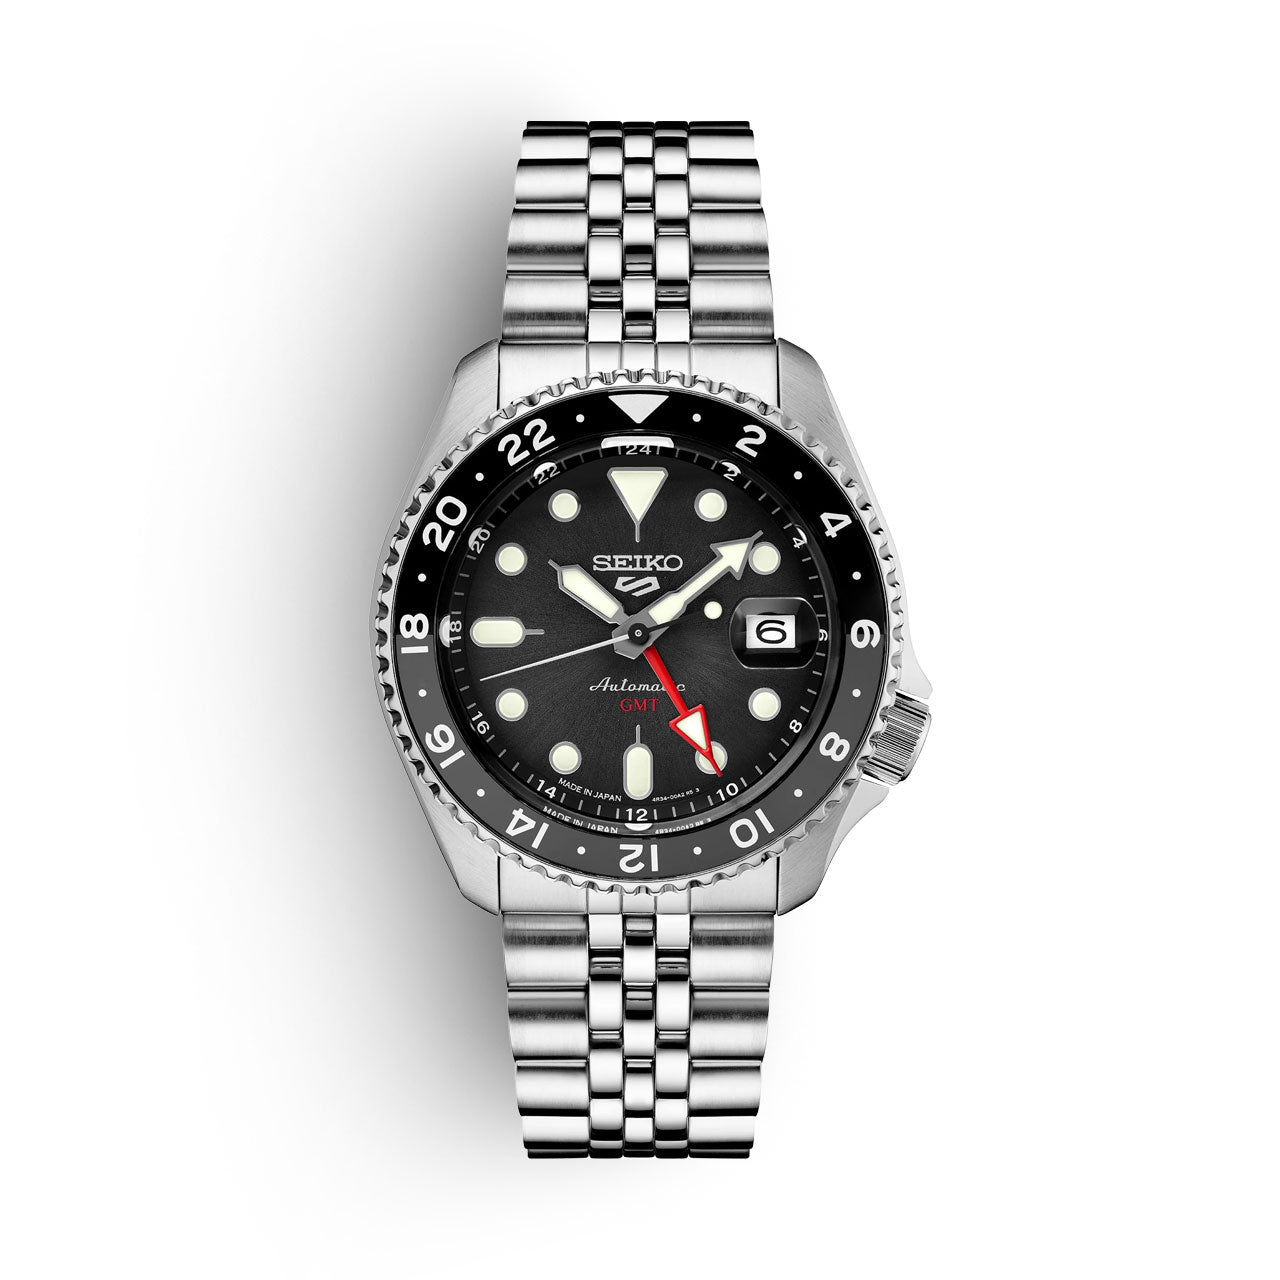 The Best Affordable GMT, Seiko 5 Sports SSK001